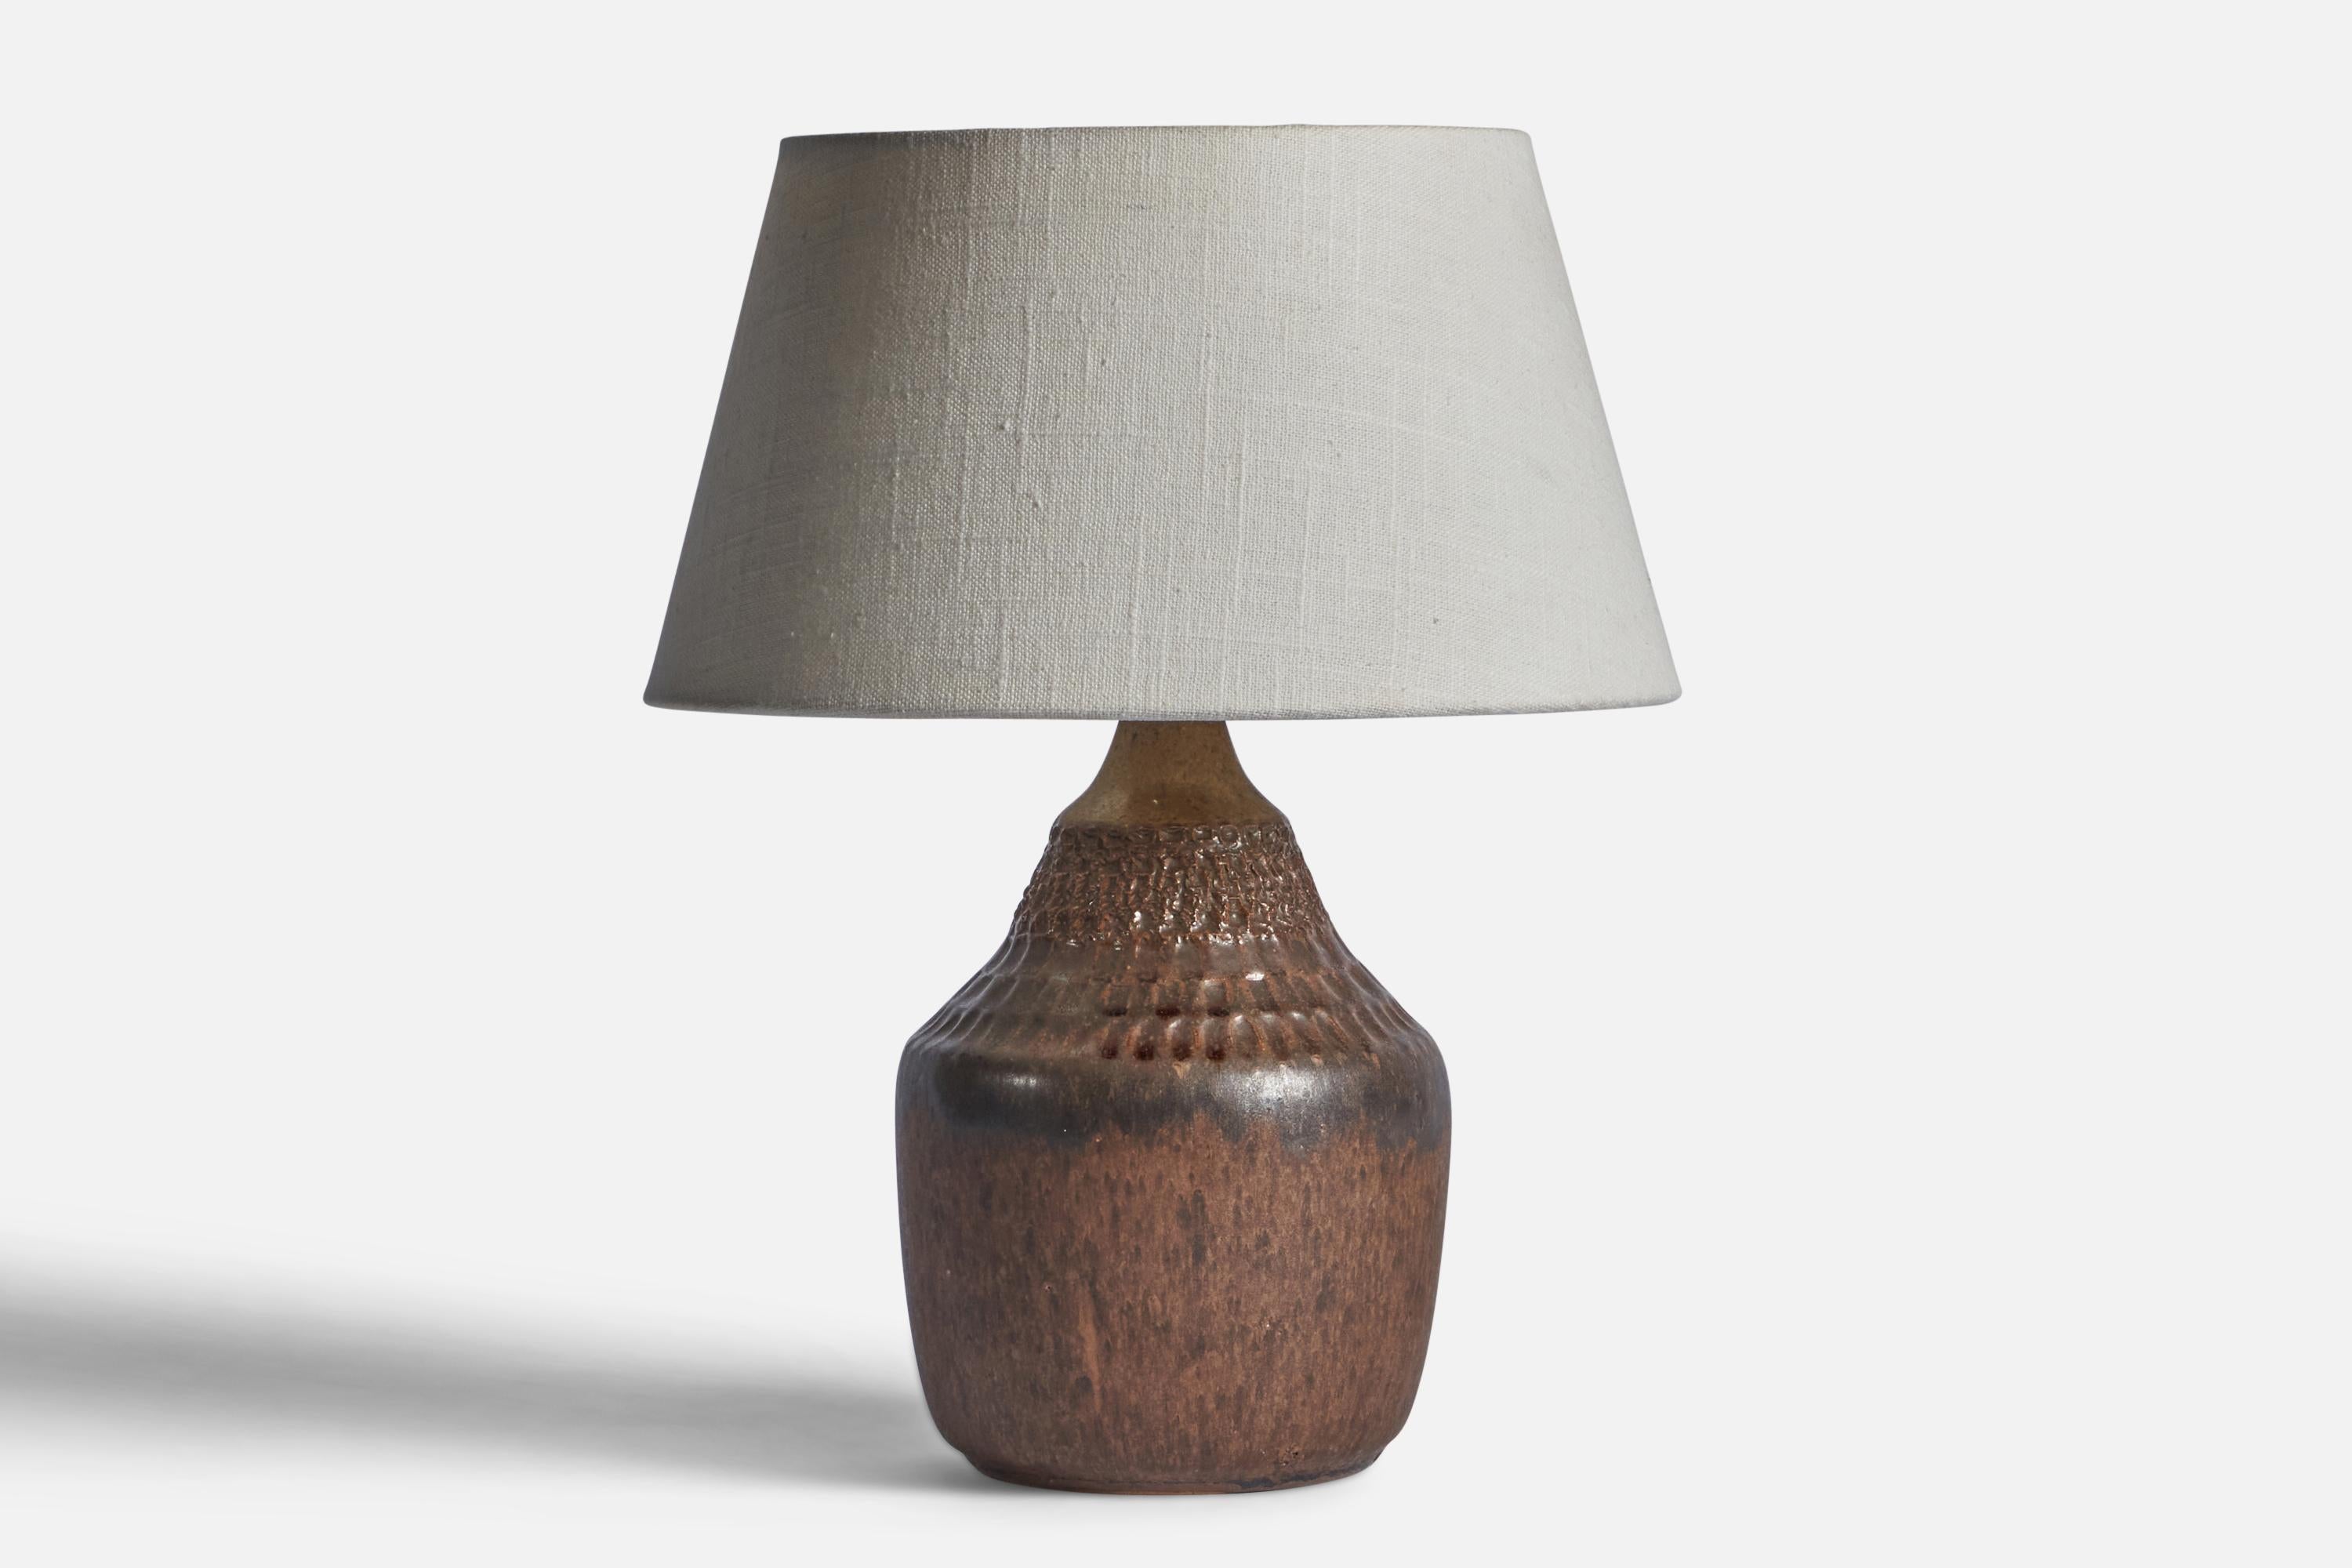 A brown-glazed and incised stoneware table lamp designed and produced by Klase Höganäs, Sweden, 1960s.

Dimensions of Lamp (inches): 10” H x 5.25” Diameter
Dimensions of Shade (inches): 7” Top Diameter x 10” Bottom Diameter x 5.5” H 
Dimensions of